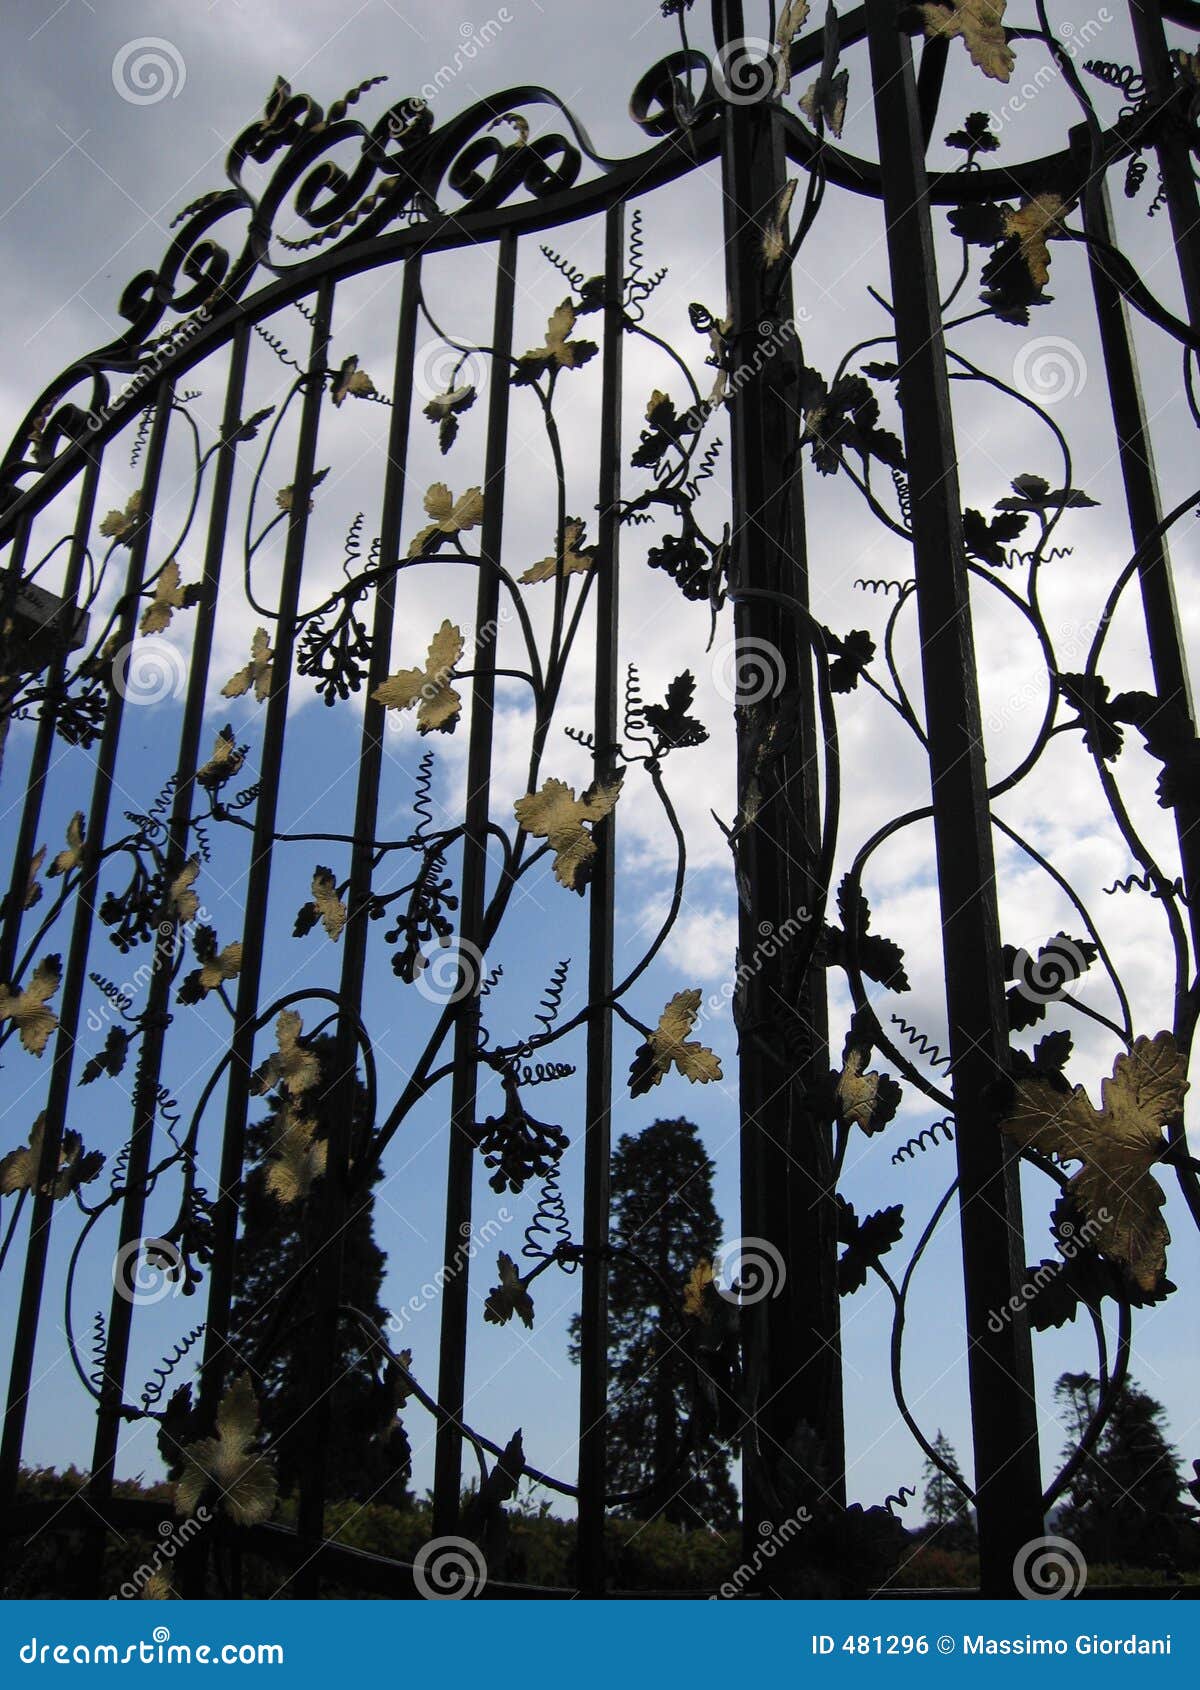 Gate stock photo. Image of clouds, europe, gate, leaf, trees - 481296